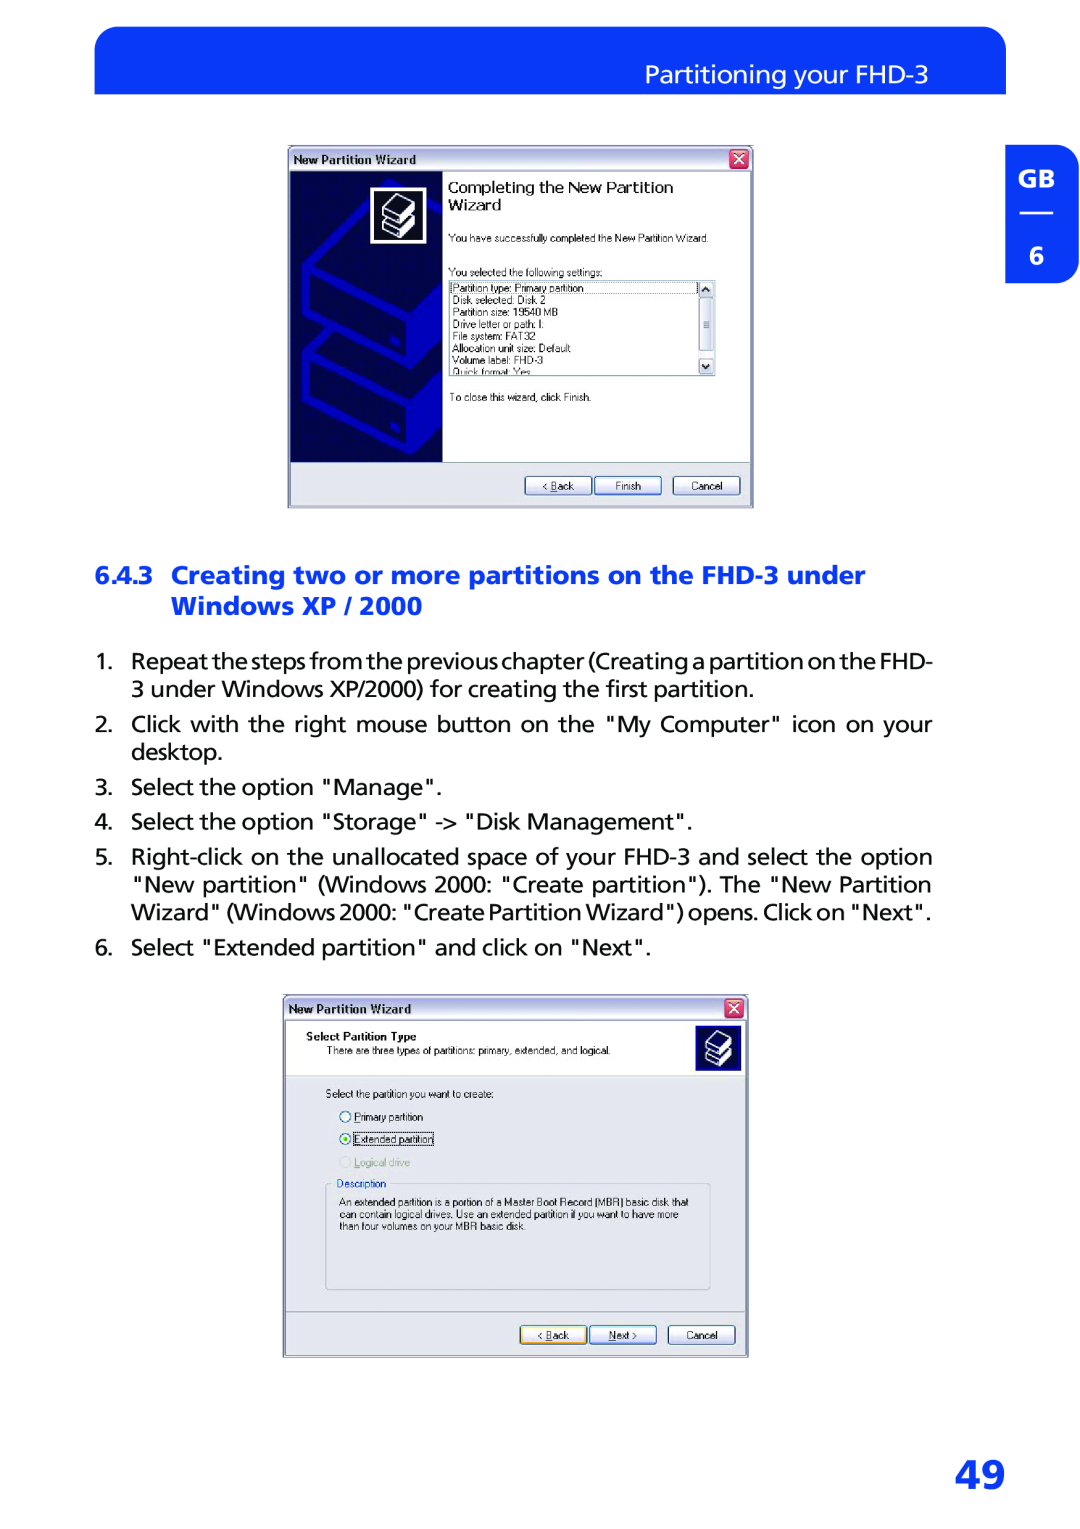 Freecom Technologies manual Creating two or more partitions on the FHD-3 under Windows XP, Partitioning your FHD-3 GB 